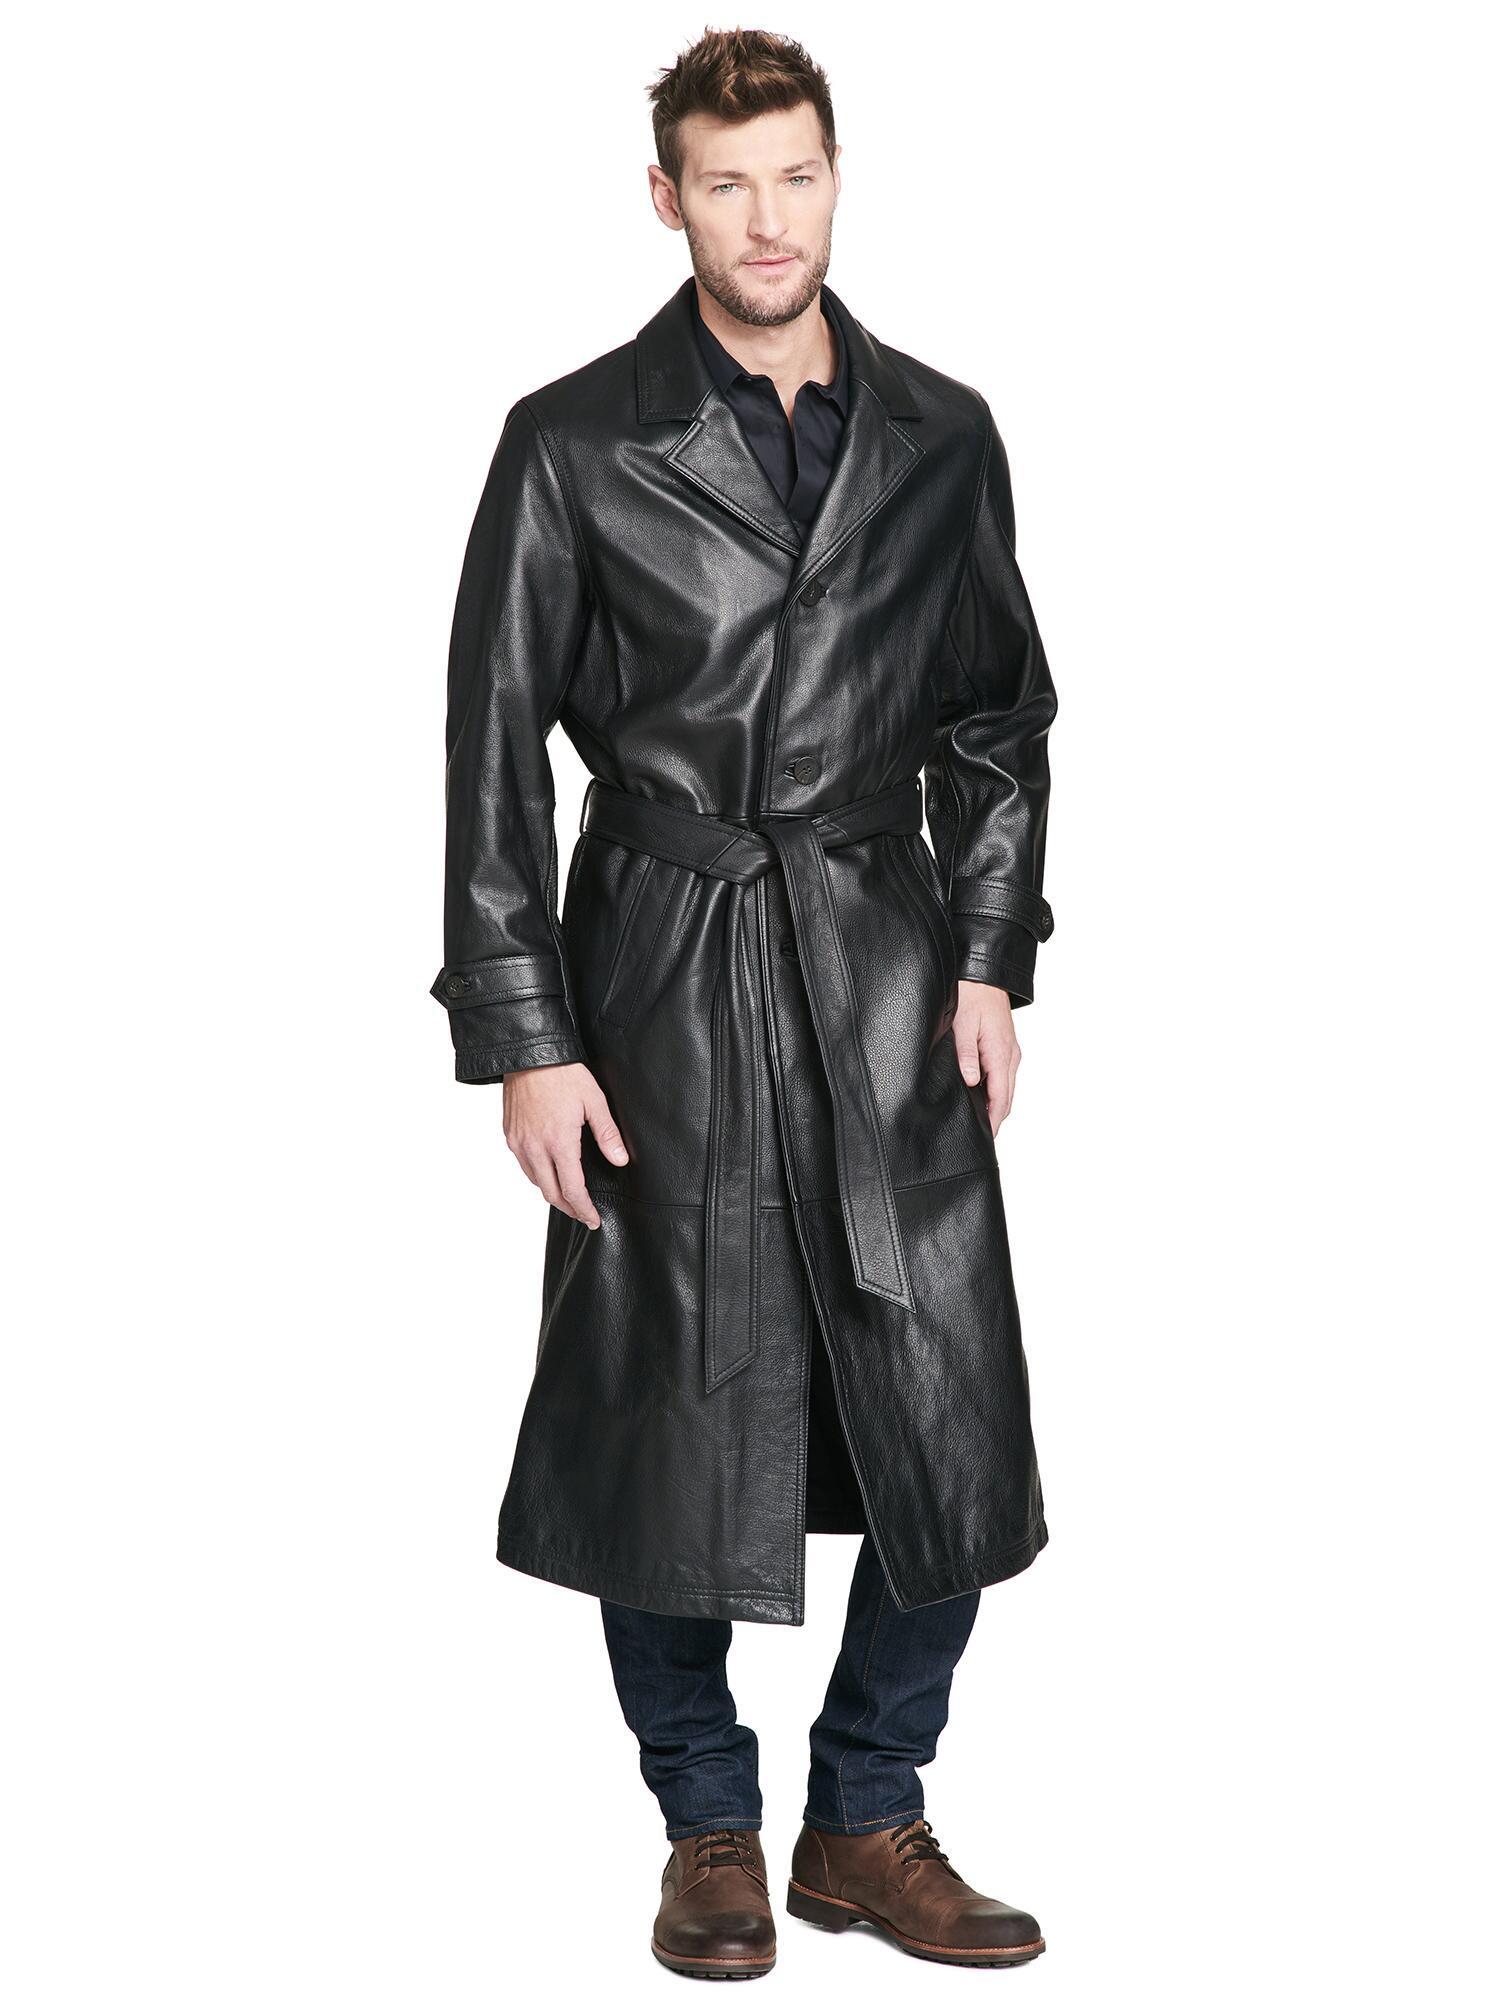 Wilson’s Leather Vintage 1970s Sleek Black Leather Trench Coat Long ...